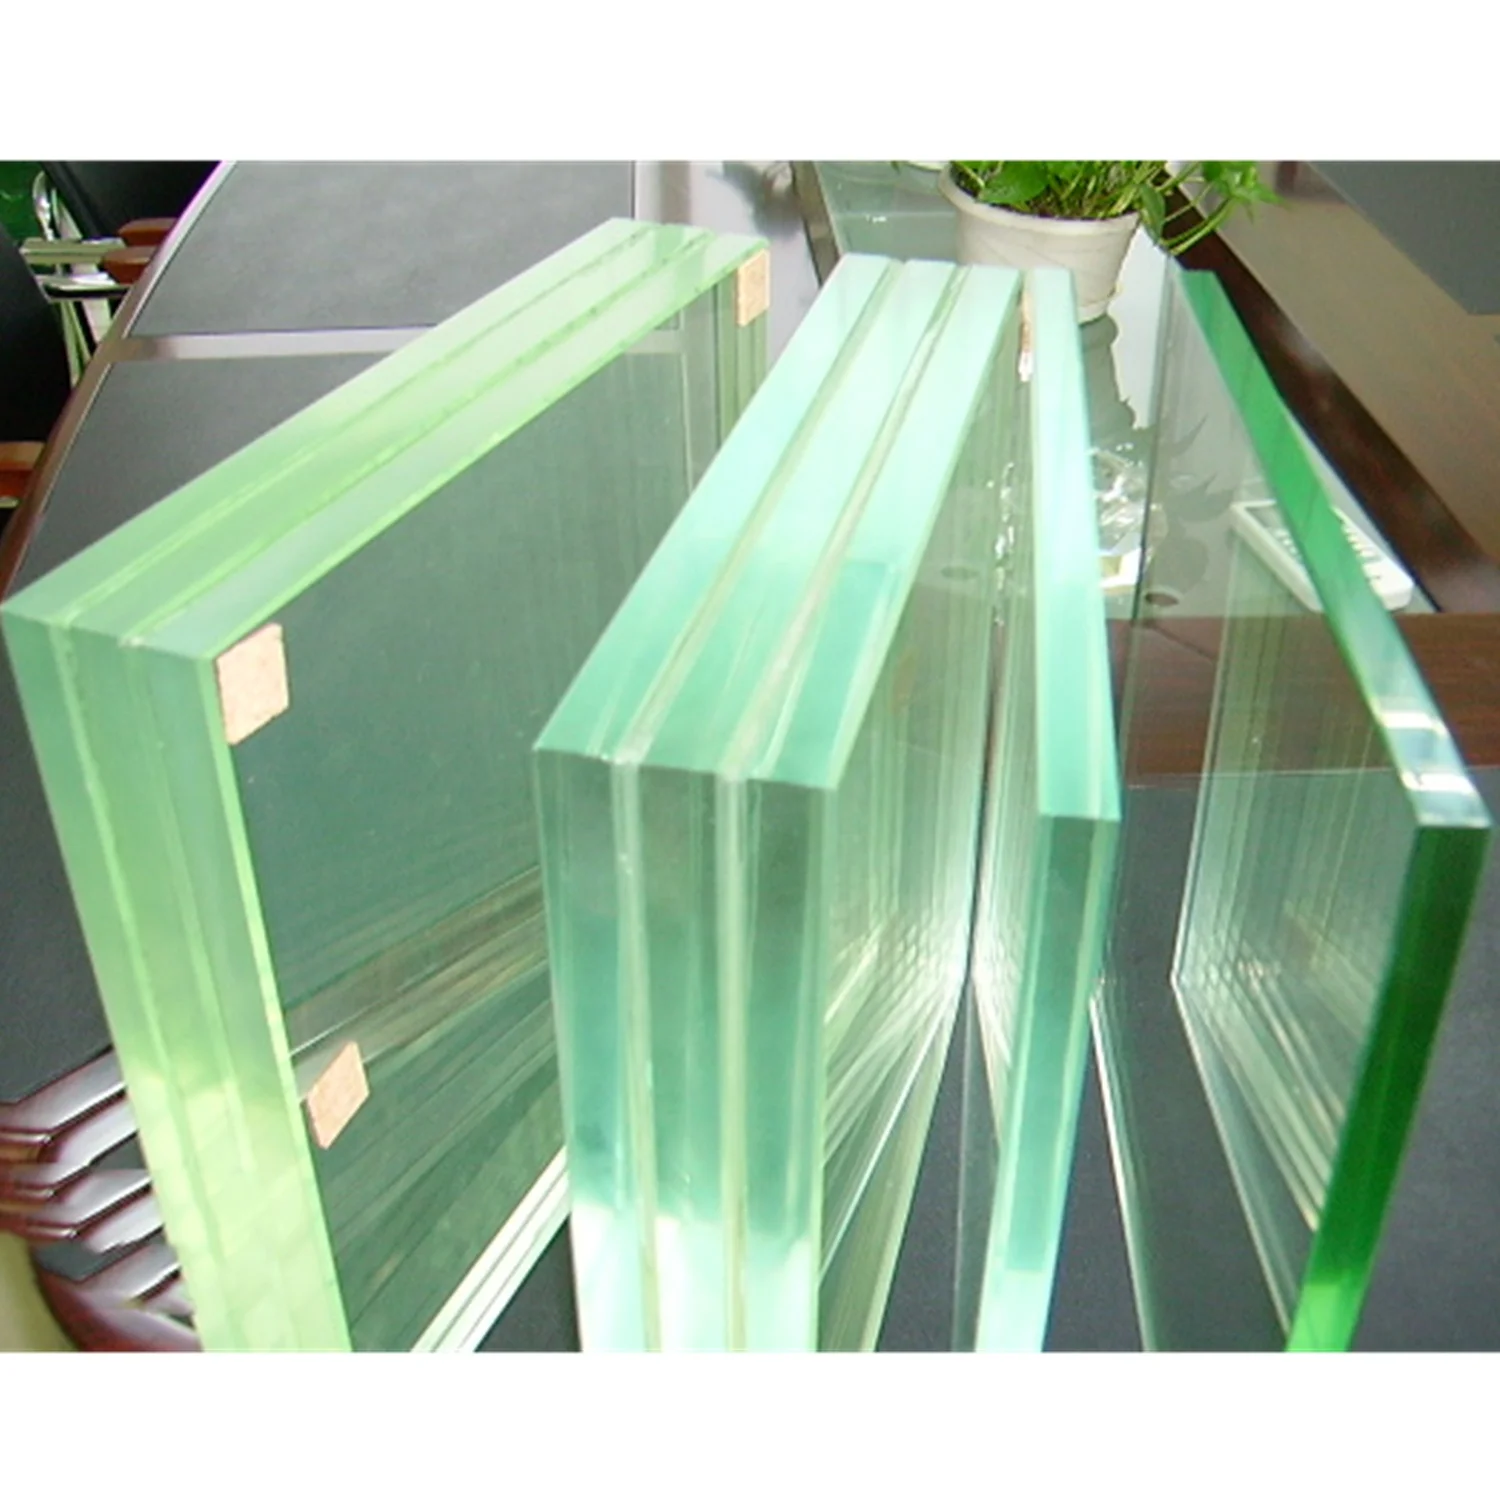 laminated glass low price 55.2 66.2  44.2 6.38 10.38 6  8  16 12 13.52 mm low iron polished edge tempered triple laminated glass